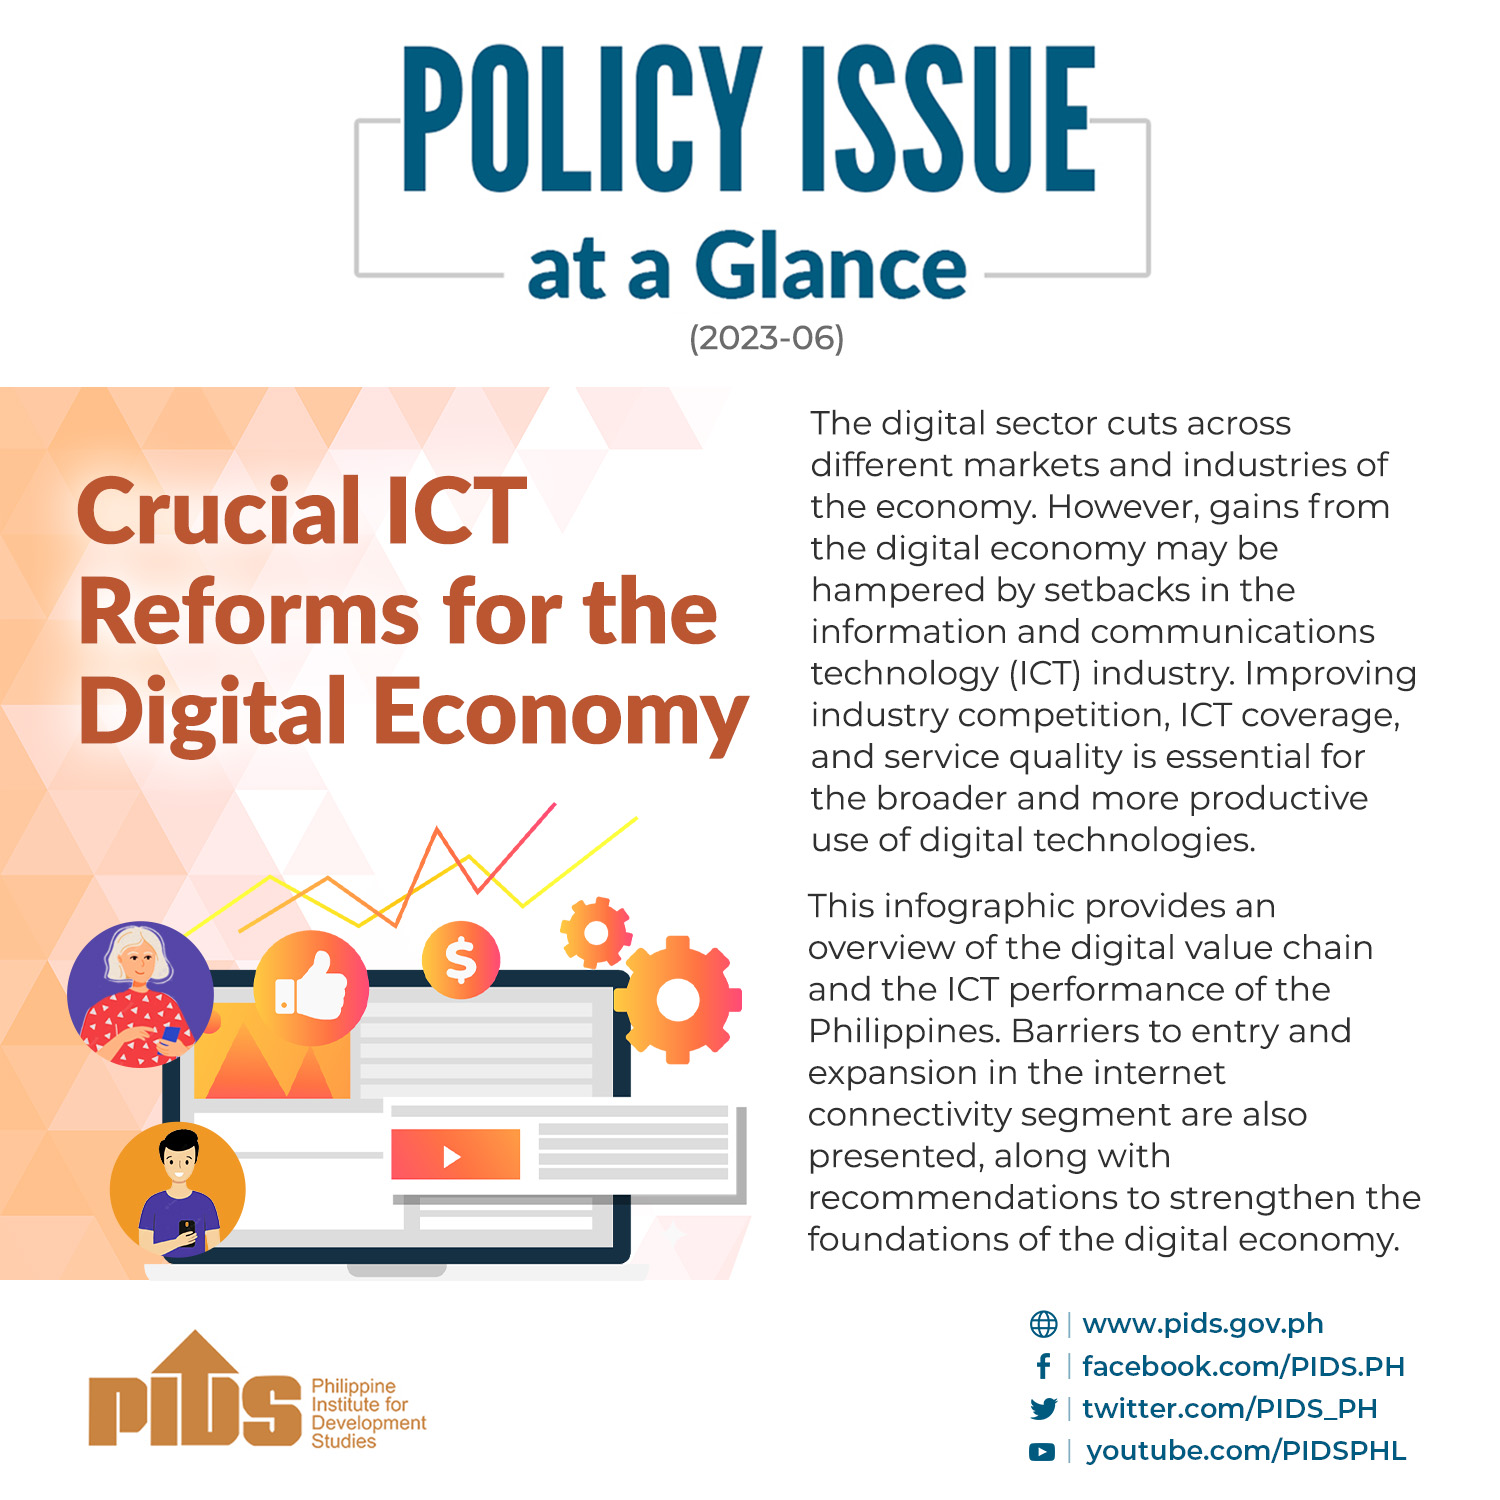 POLICY ISSUE AT A GLANCE: Crucial ICT Reforms for the Digital Economy-PIAAG 2023-06 Slide 01.jpg